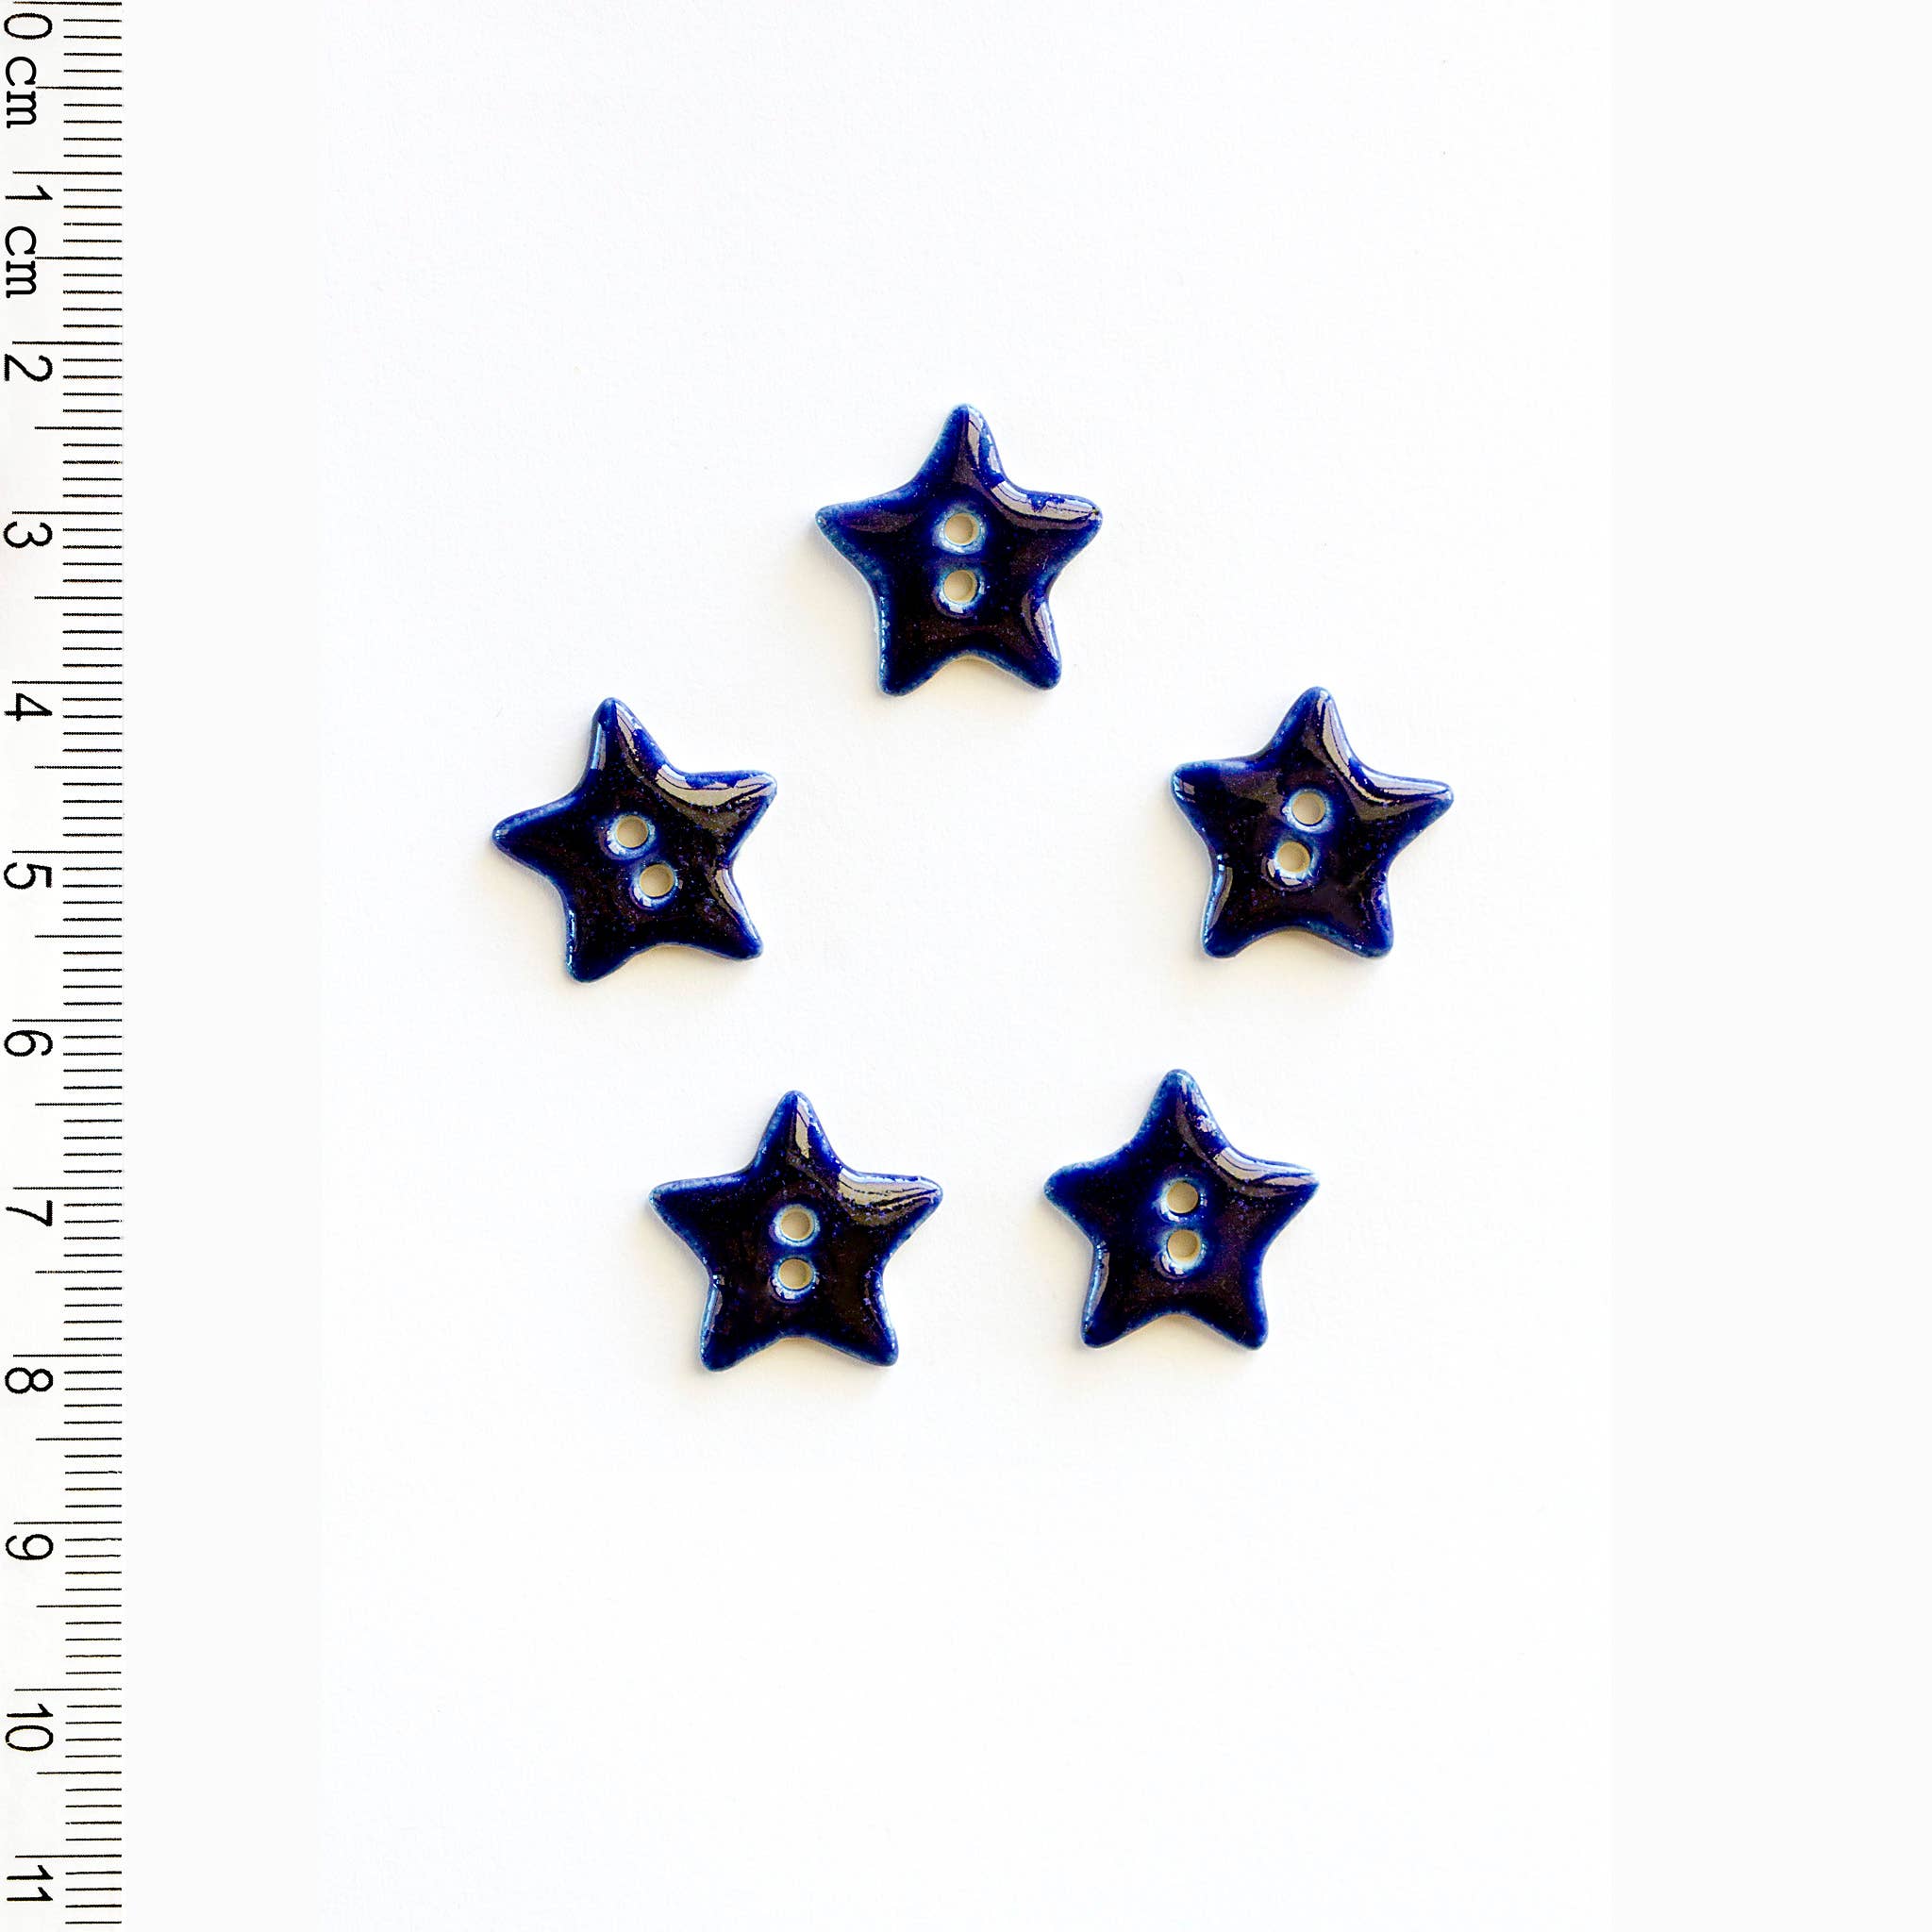 Incomparable Buttons - 5 Blue Star Buttons